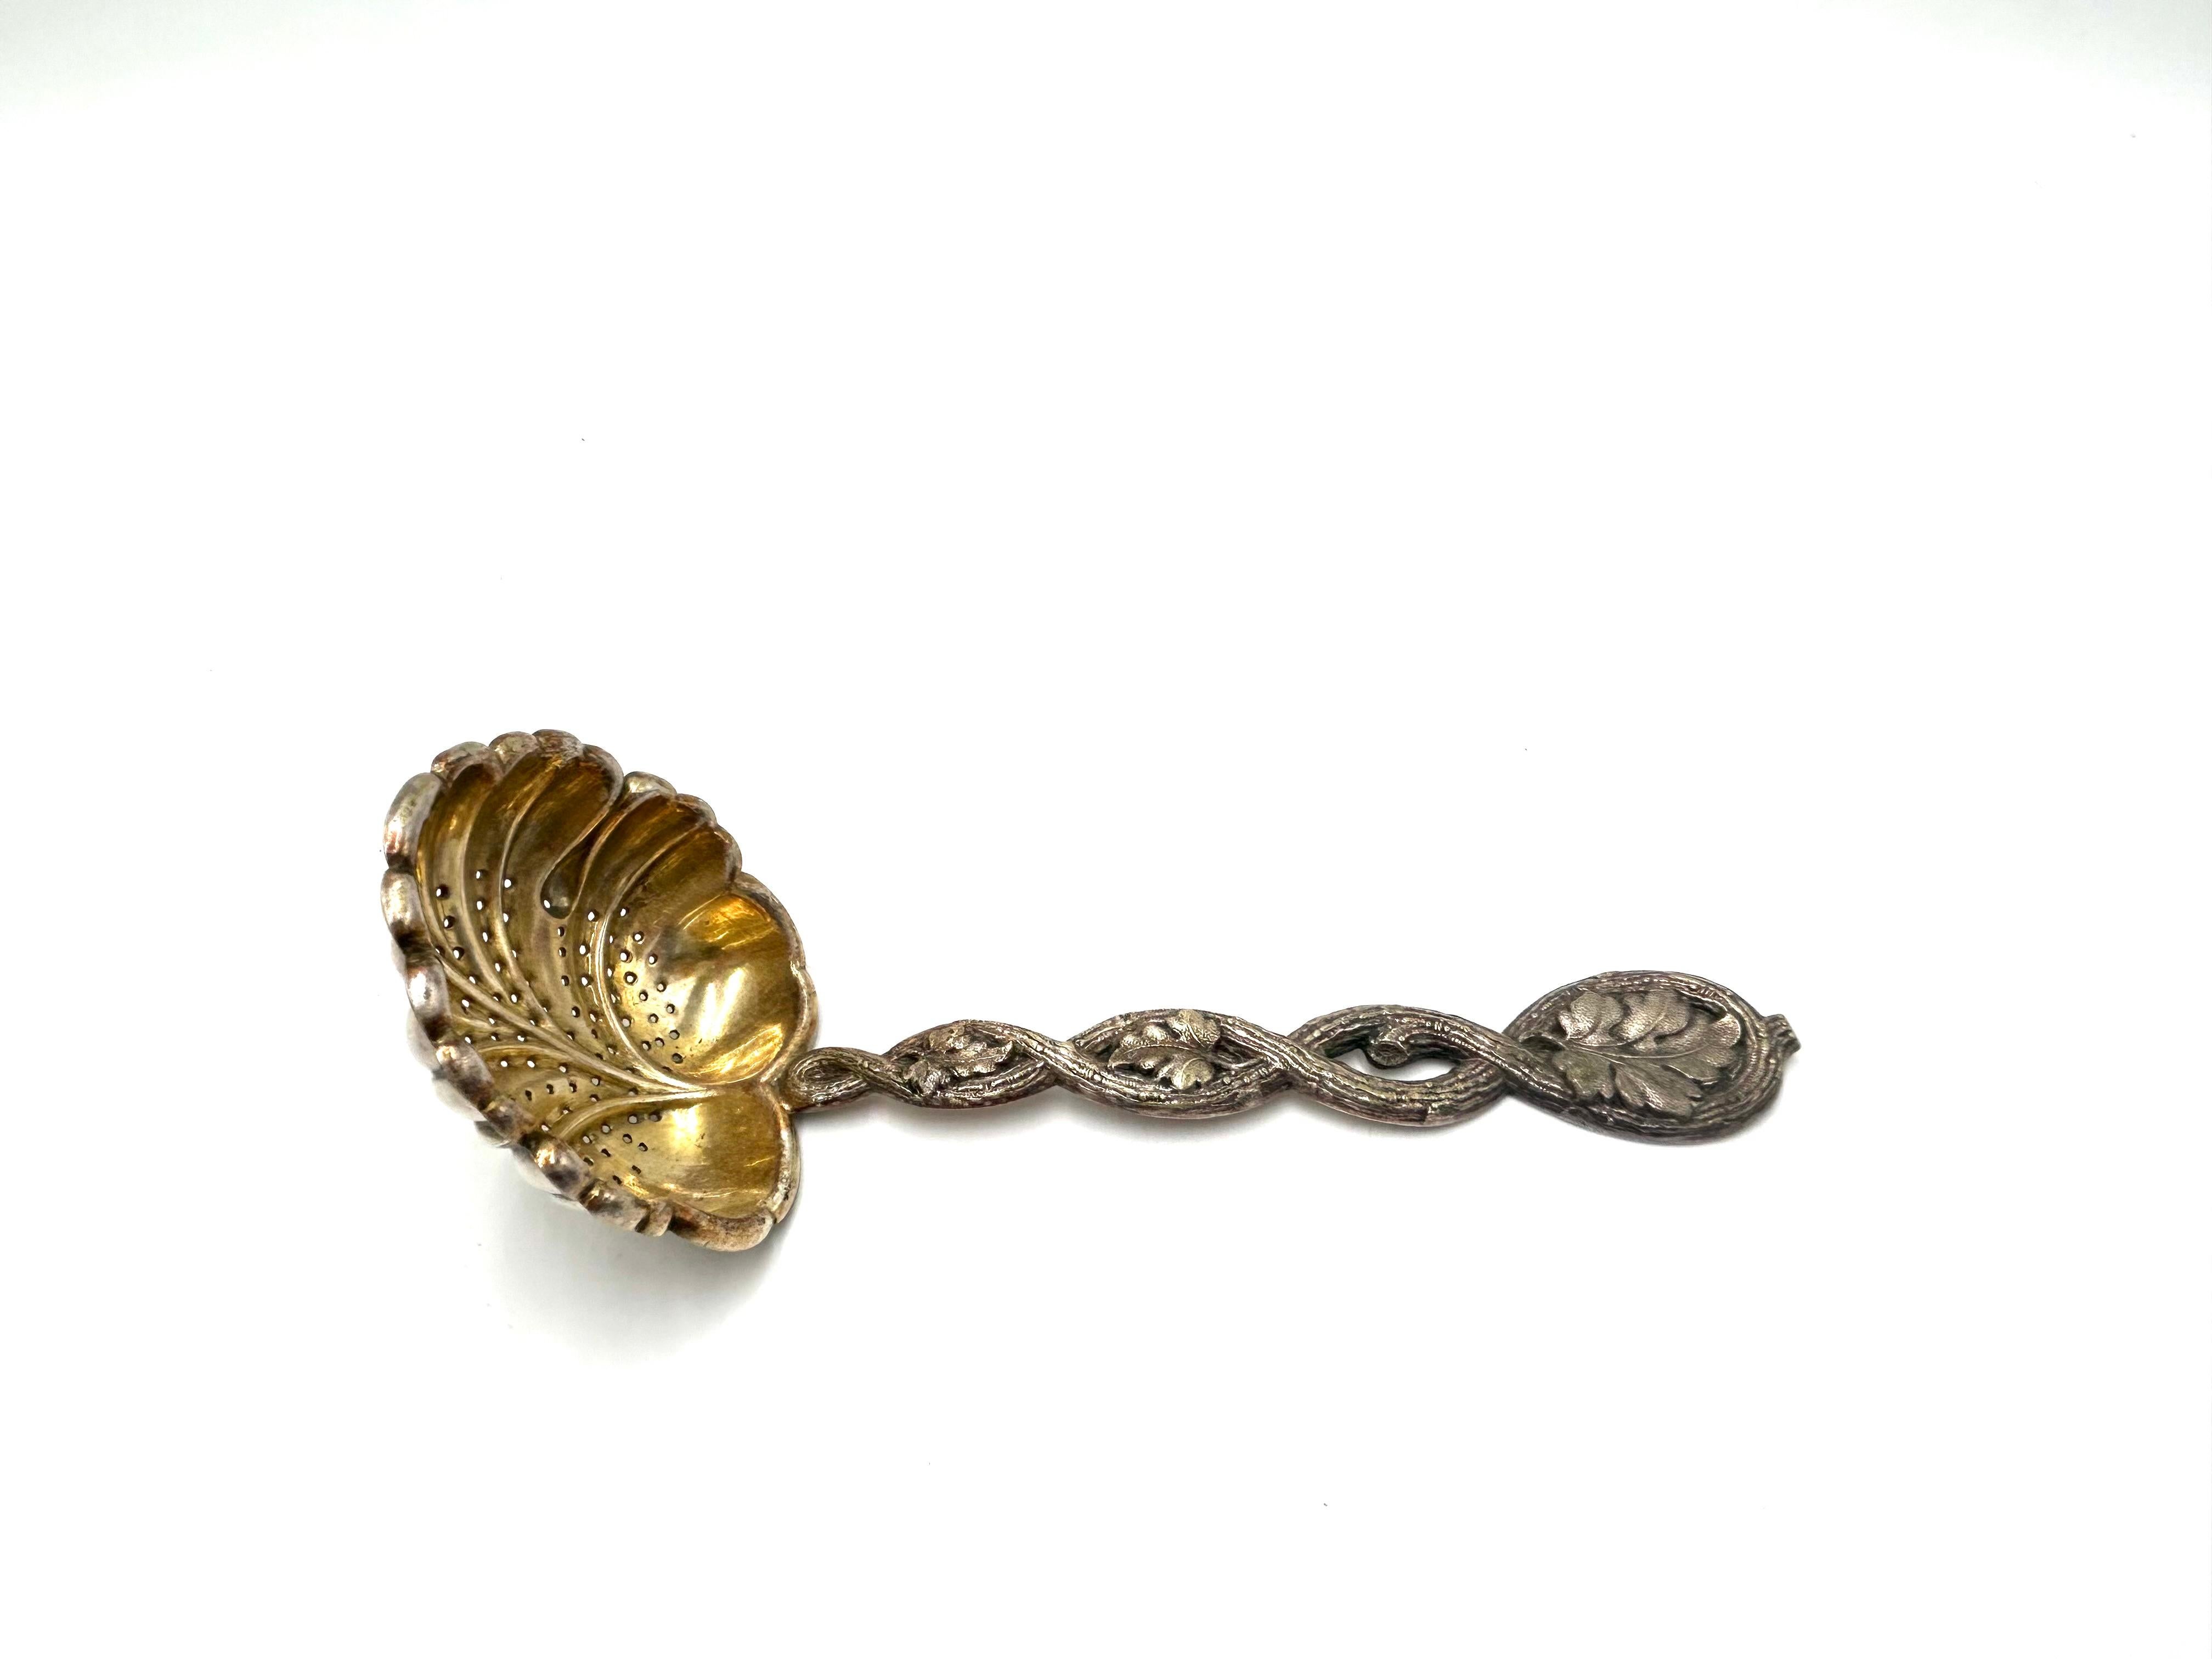 Powdered sugar spoon made of plated metal

Dipper with a leaf-shaped strainer, handle in the form of a vine

hallmarked GEBR. BUCH / WARSCHAU - indistinctly reflected and the attempt 933

Produced by the Buch Brothers factory in Warsaw at the end of